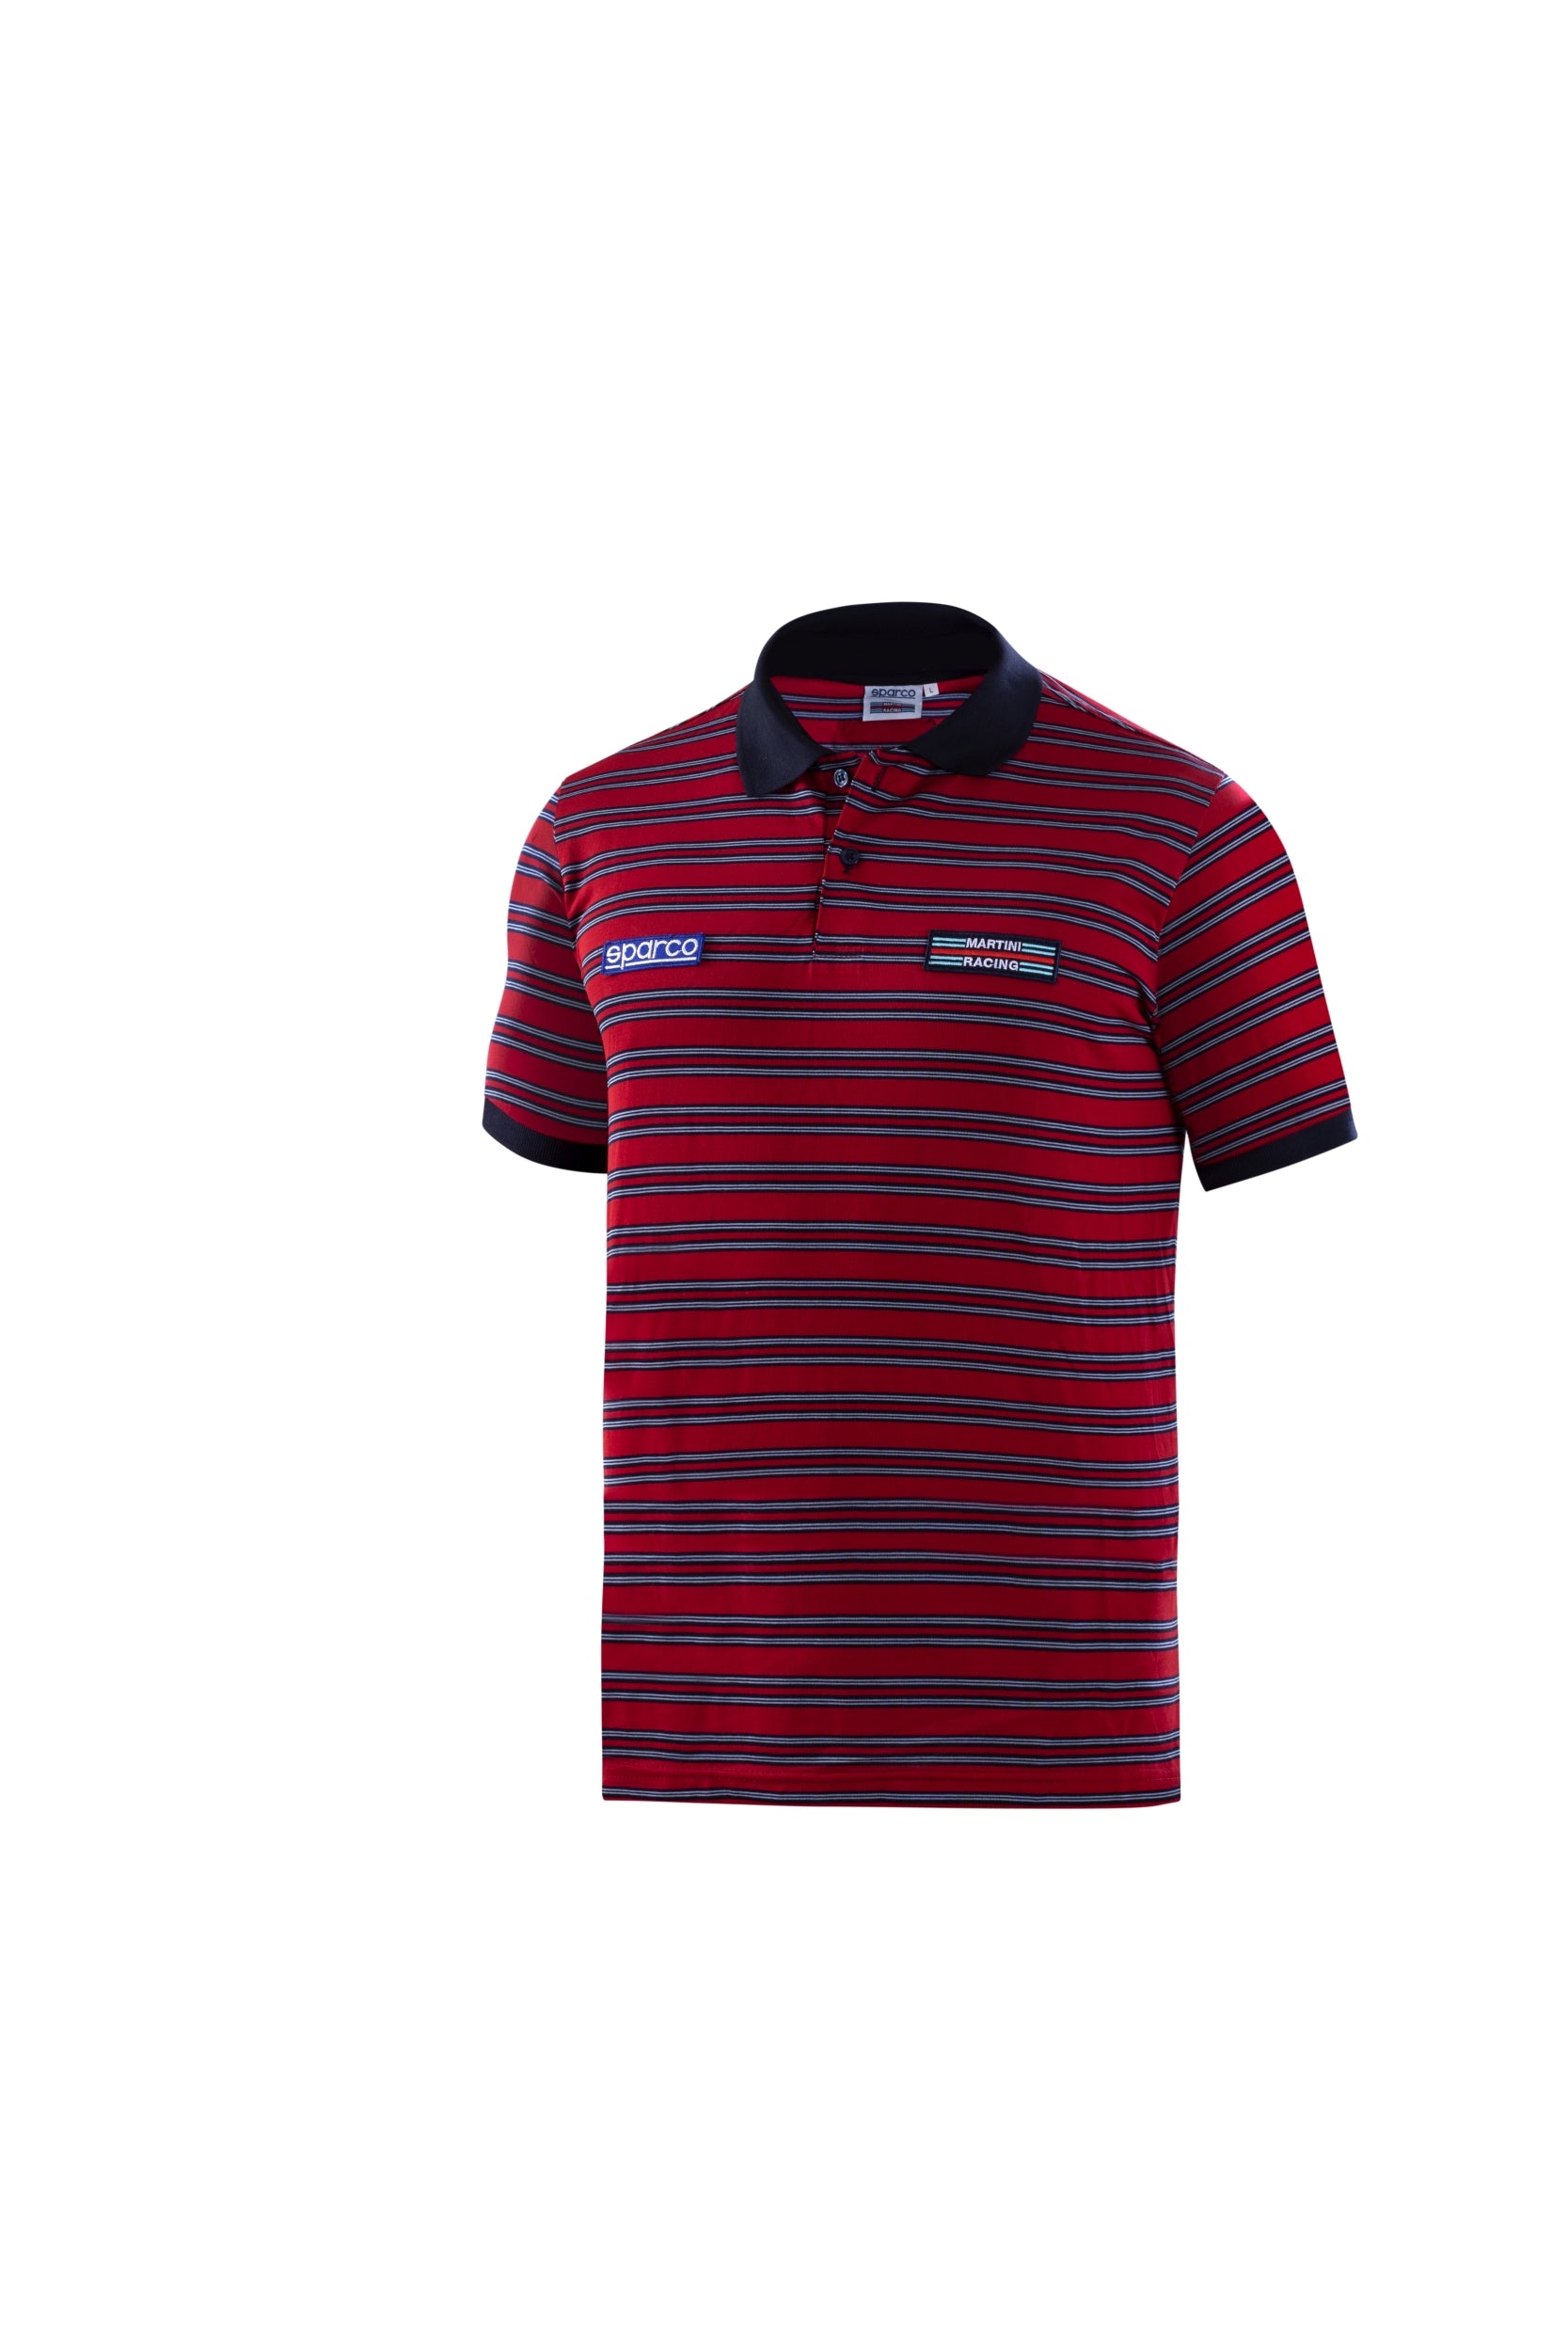 SPARCO 01396MRRS3L Polo MARTINI RACING Sportline Stripes, red, size L Photo-0 